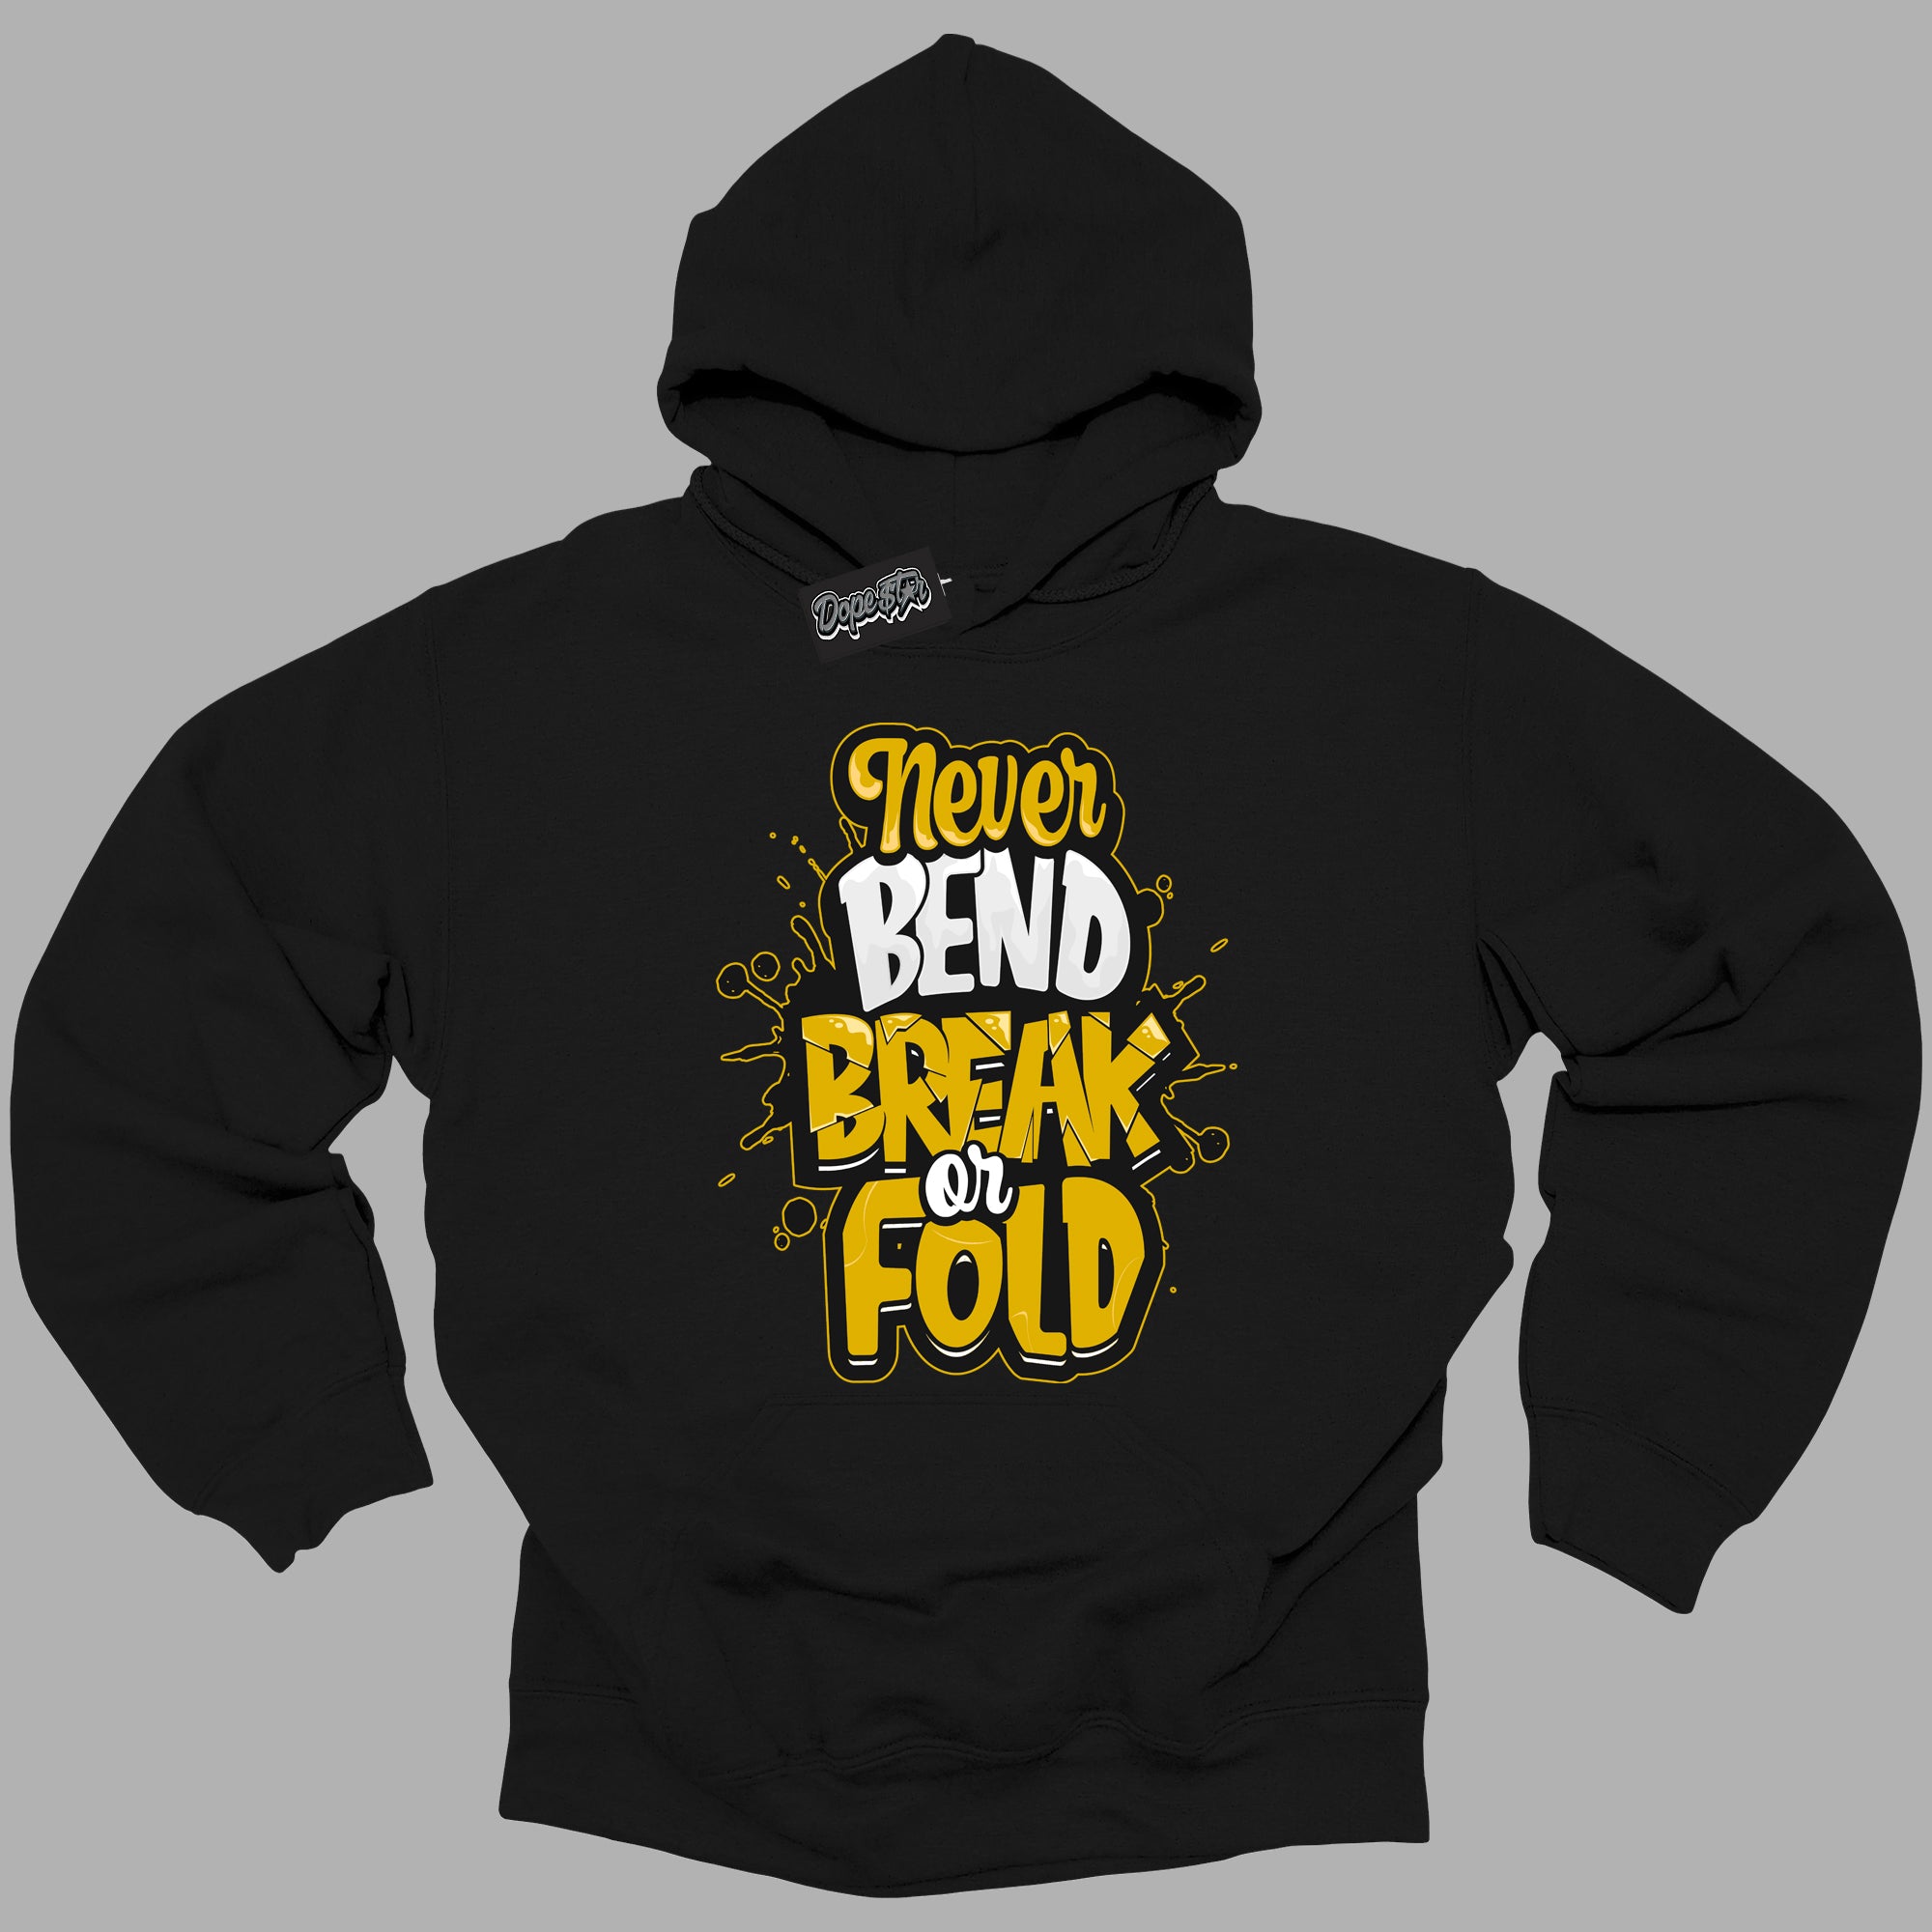 Cool Black Hoodie with “ Never Bend Break Or Fold ”  design that Perfectly Matches Yellow Ochre 6s Sneakers.